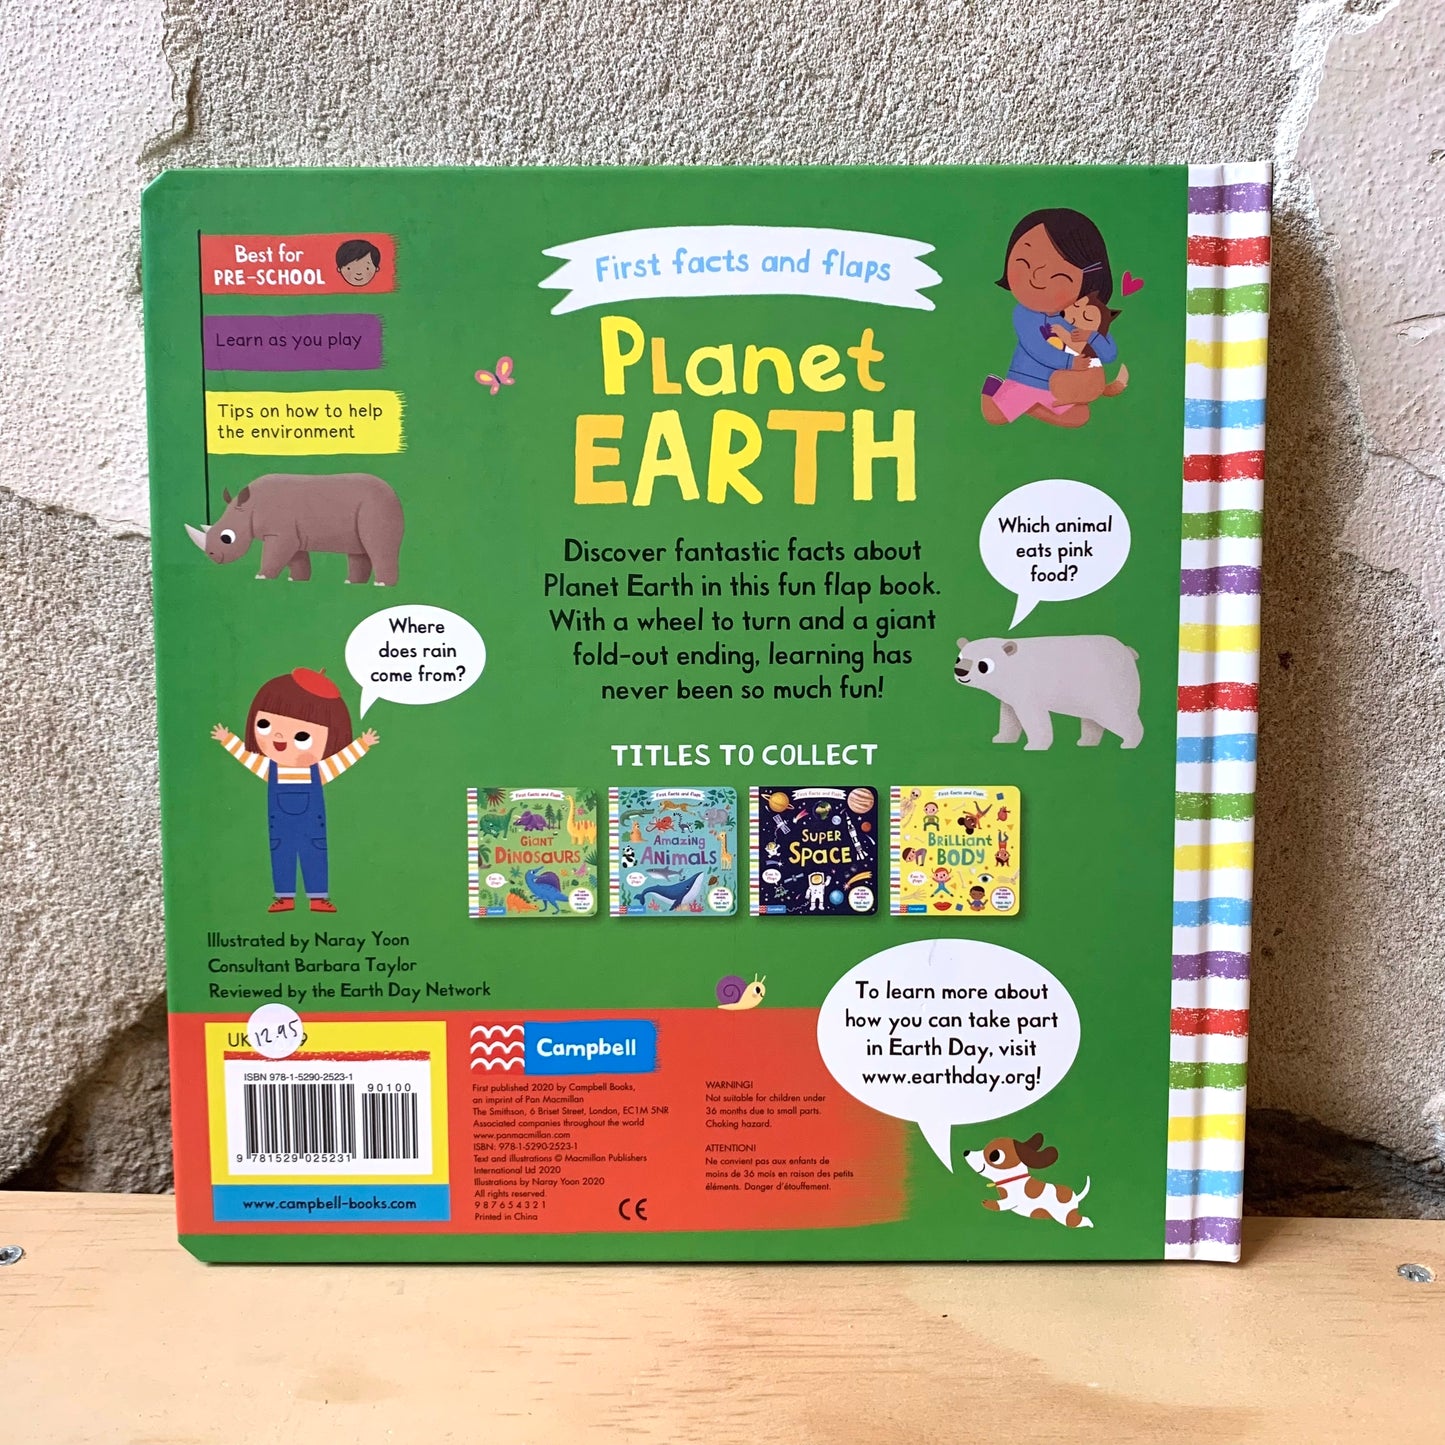 First facts and flaps: Planet Earth